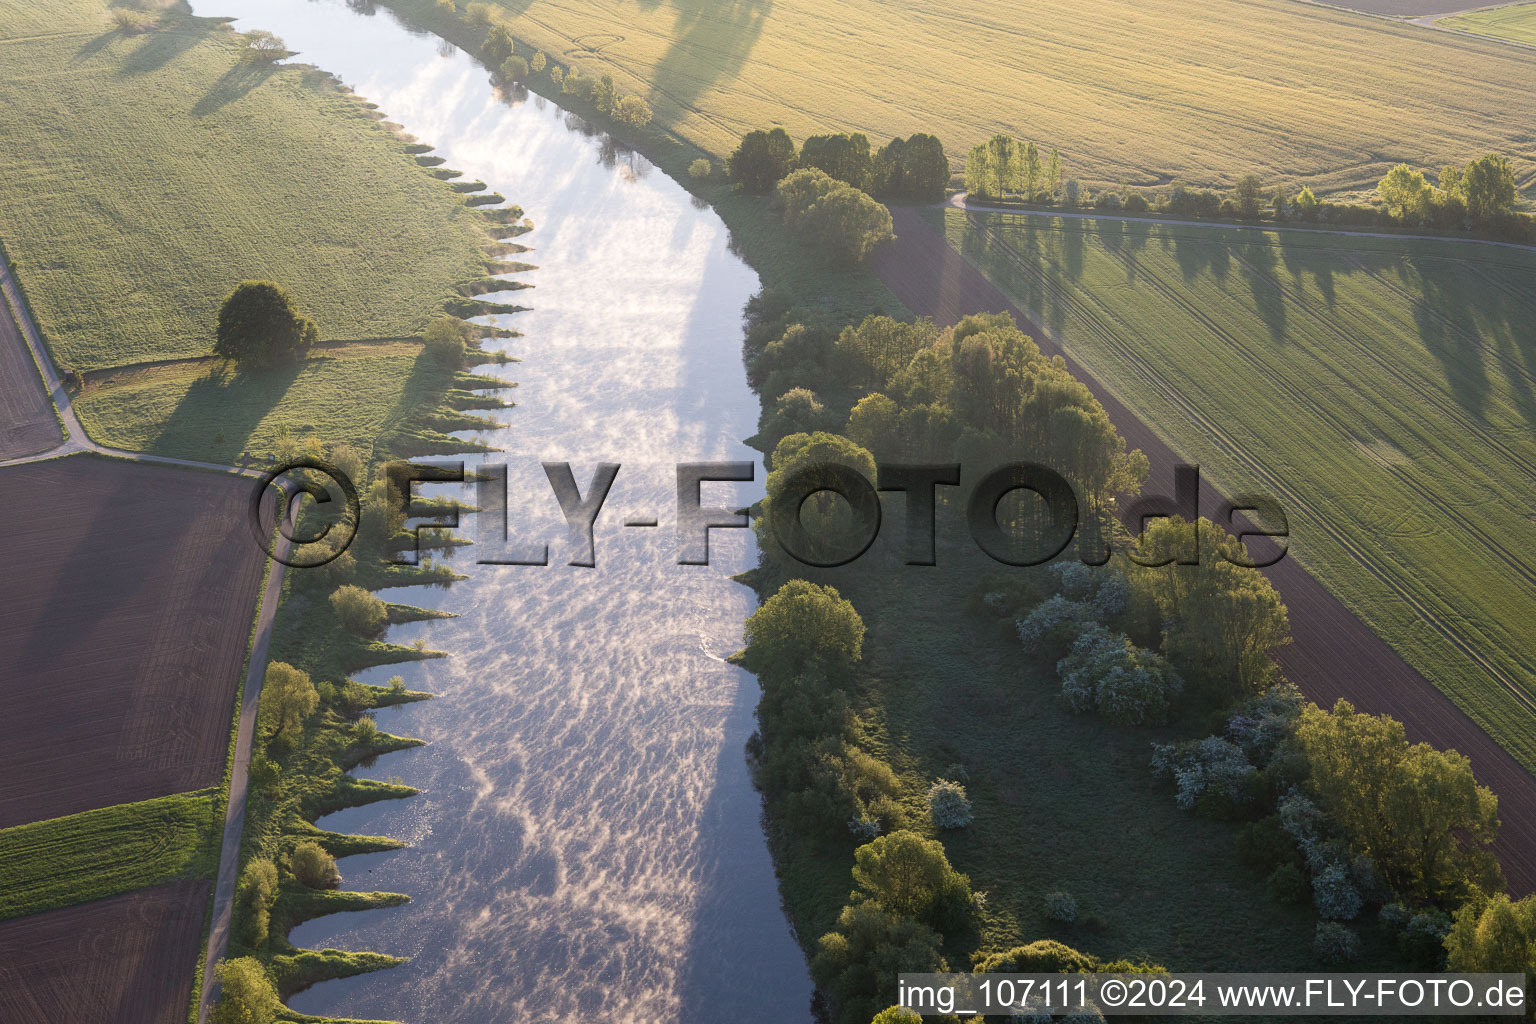 Stahle in the state North Rhine-Westphalia, Germany seen from above